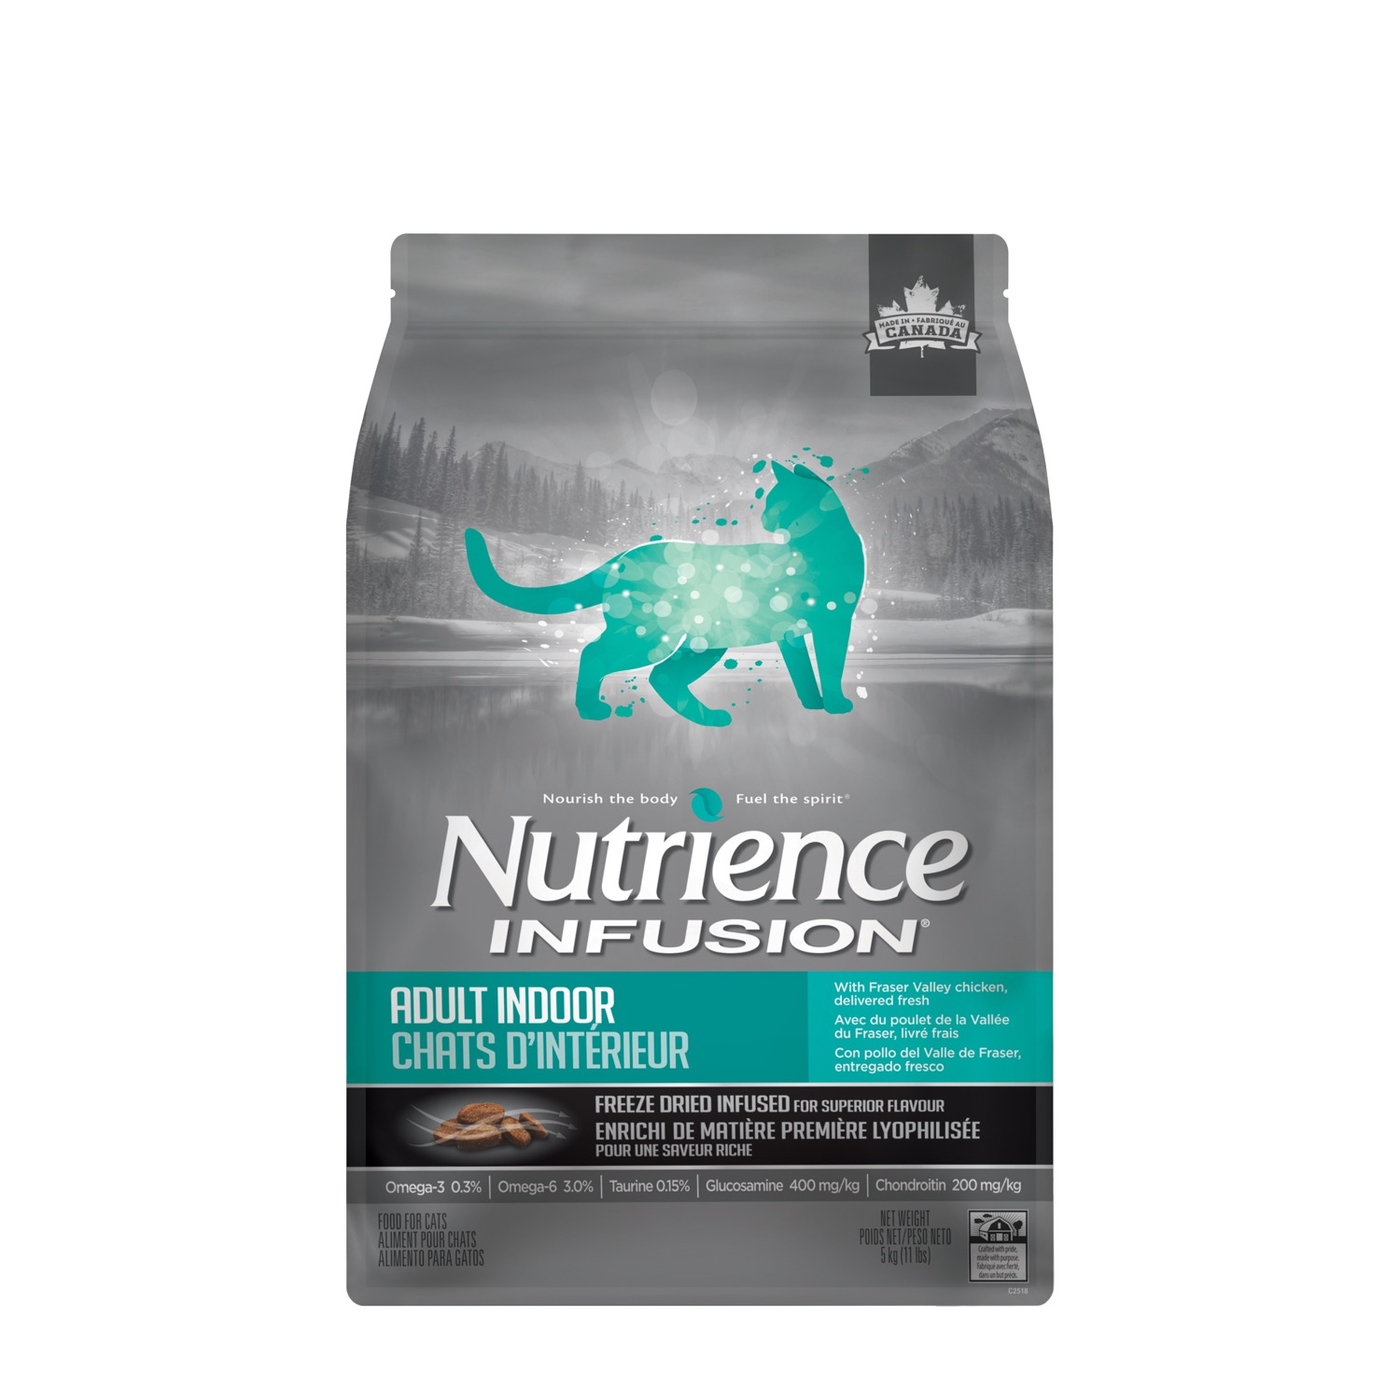 Nutrience Infusion